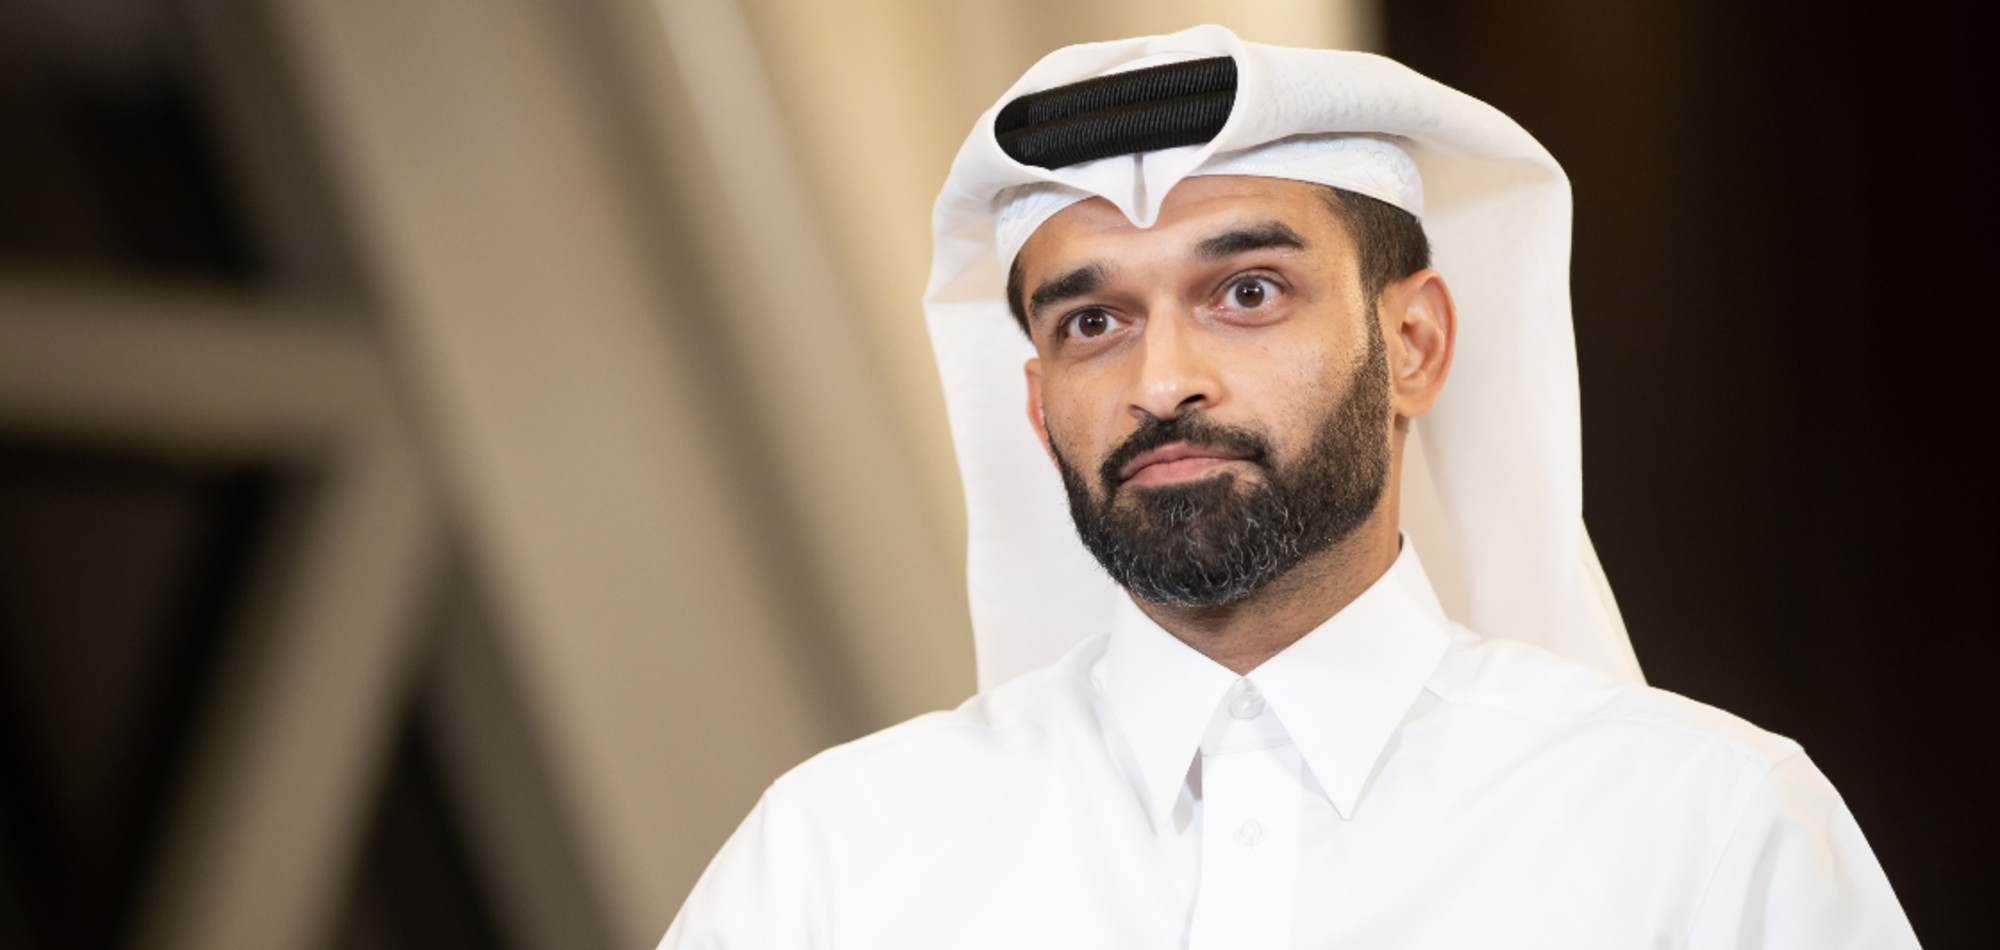 Sport has ‘unique power’ to change the world says Al-Thawadi